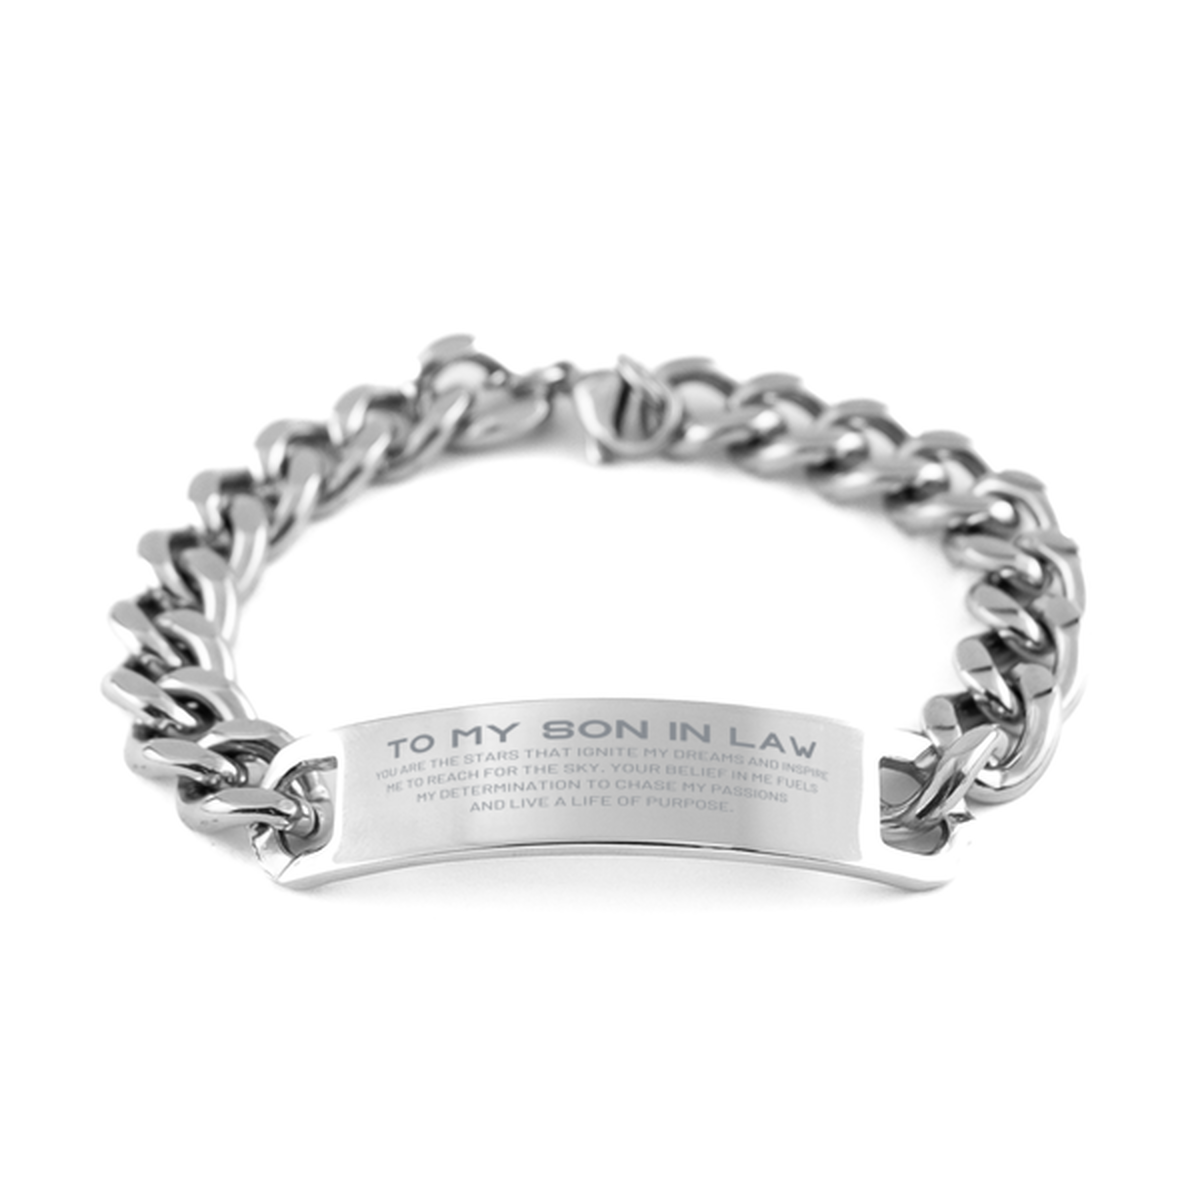 To My Son In Law Cuban Chain Stainless Steel Bracelet, You are the stars that ignite my dreams and inspire me to reach for the sky, Birthday Unique Gifts For Son In Law, Thank You Gifts For Son In Law